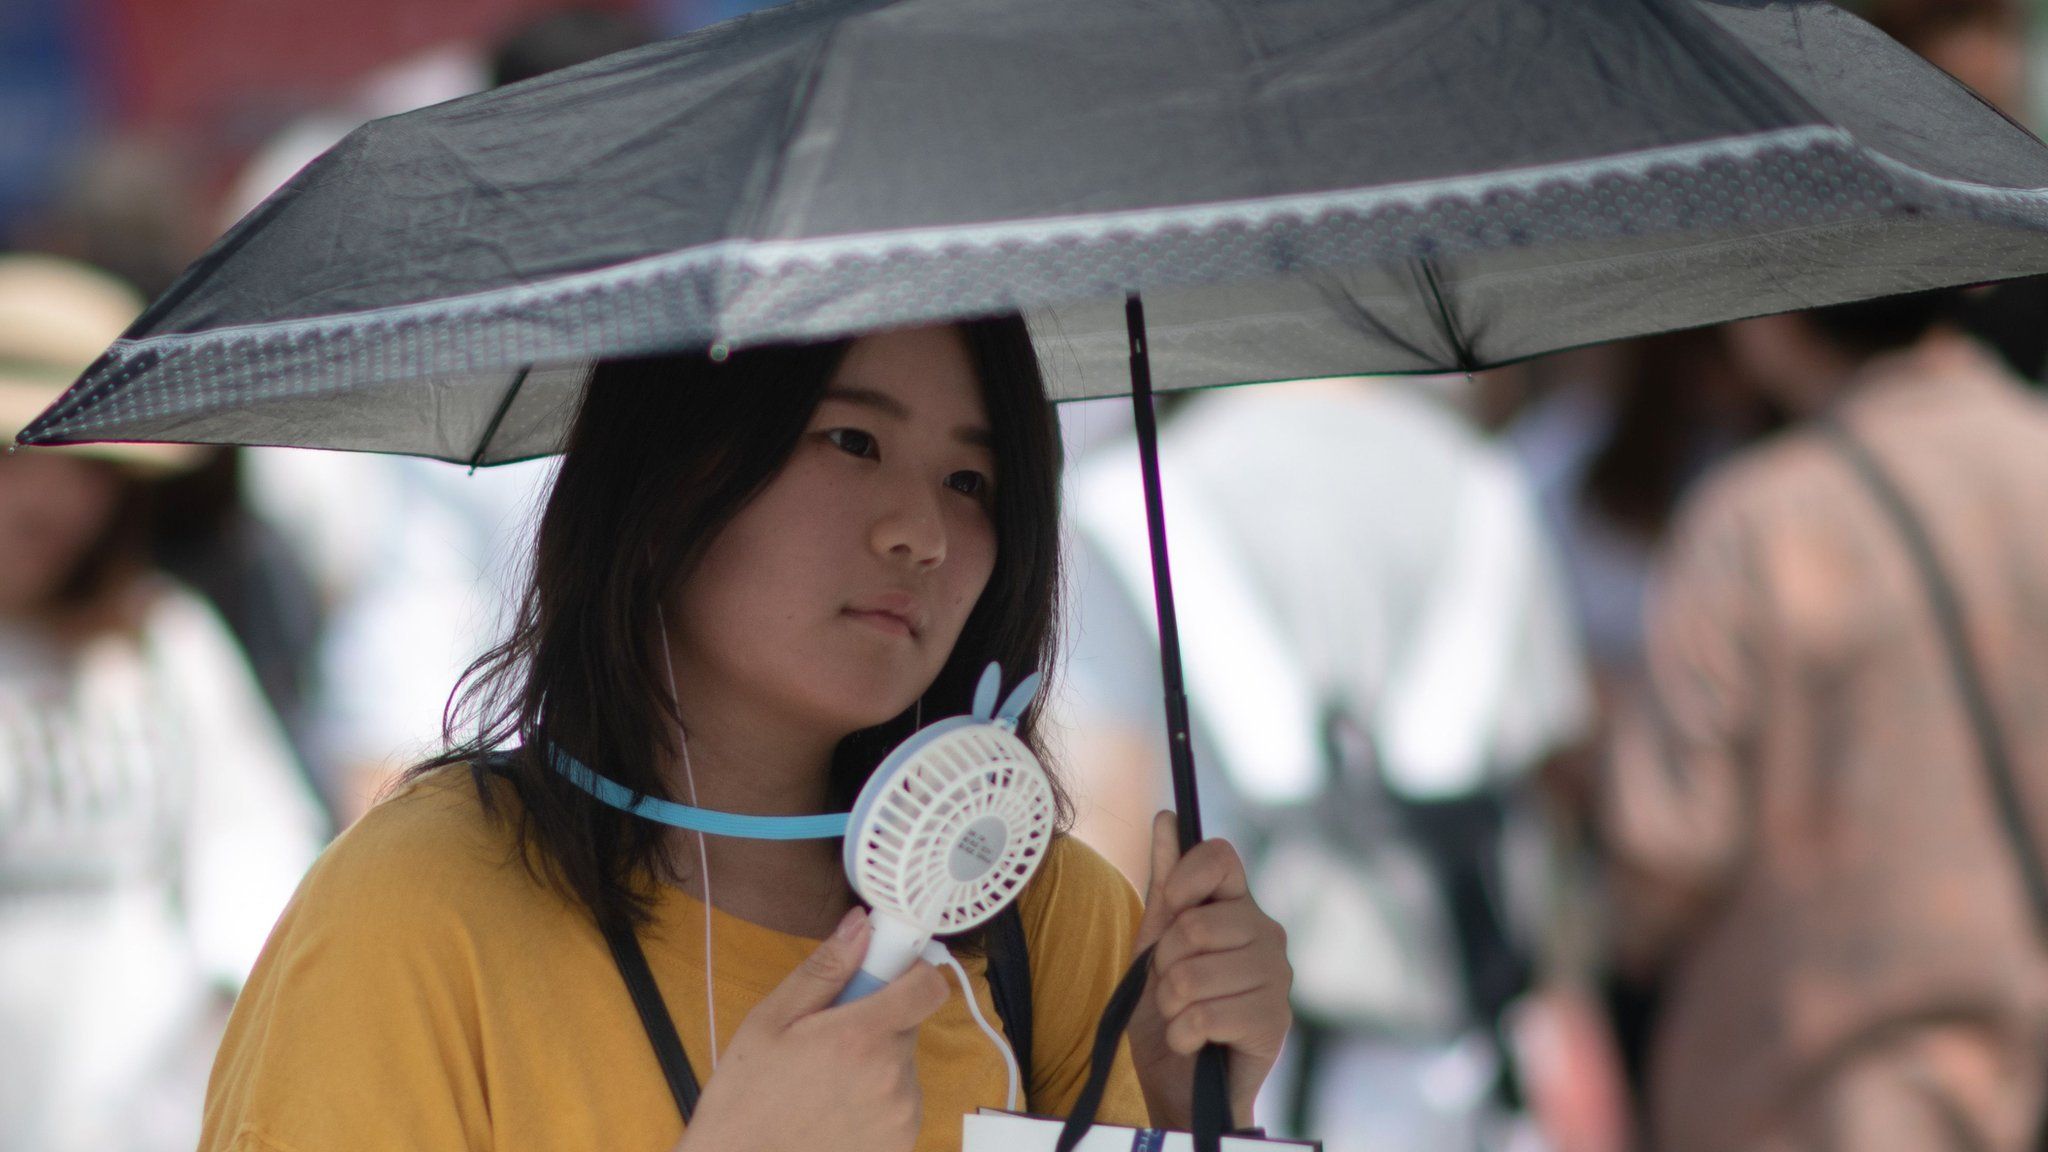 A woman uses a portable fan to cool herself in Tokyo as Japan suffers from a heatwave